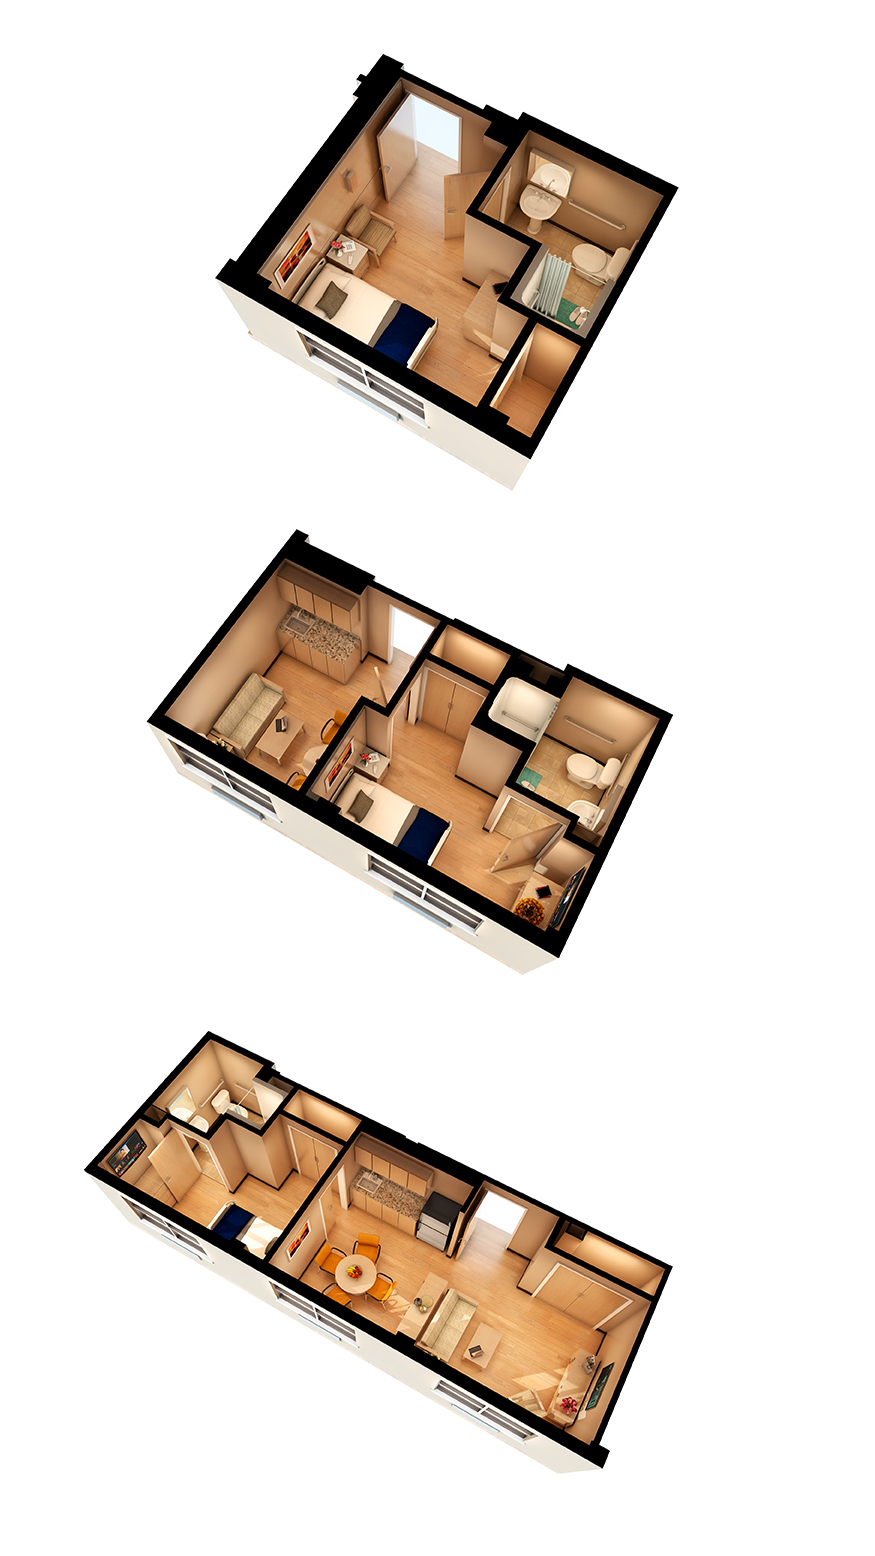 The designs for the new living spaces feature three floor plans.